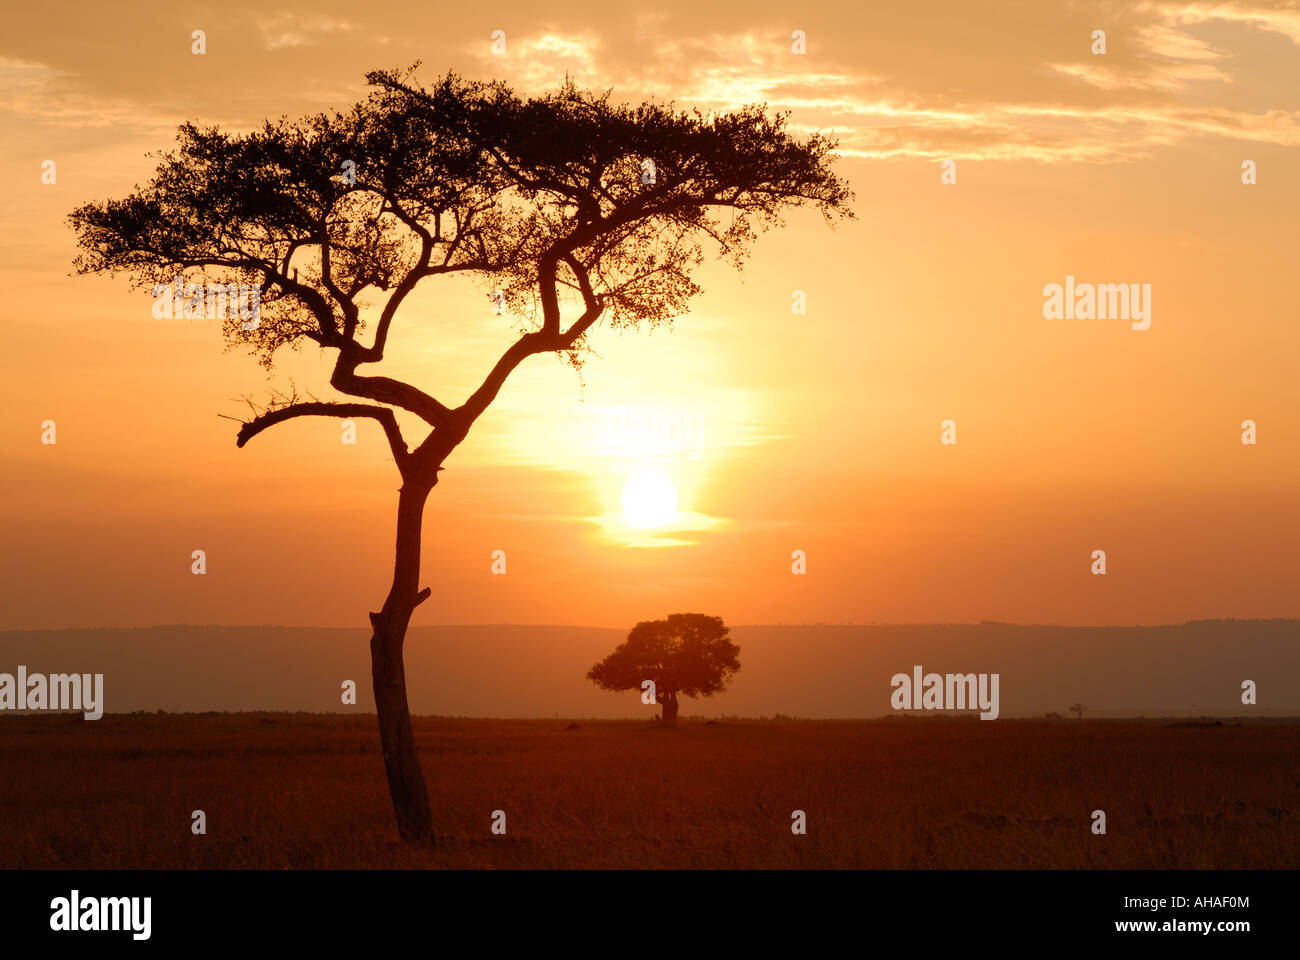 A Balanites tree silhouetted against the sunset sky in the Masai Mara National Reserve Kenya East Africa Stock Photo